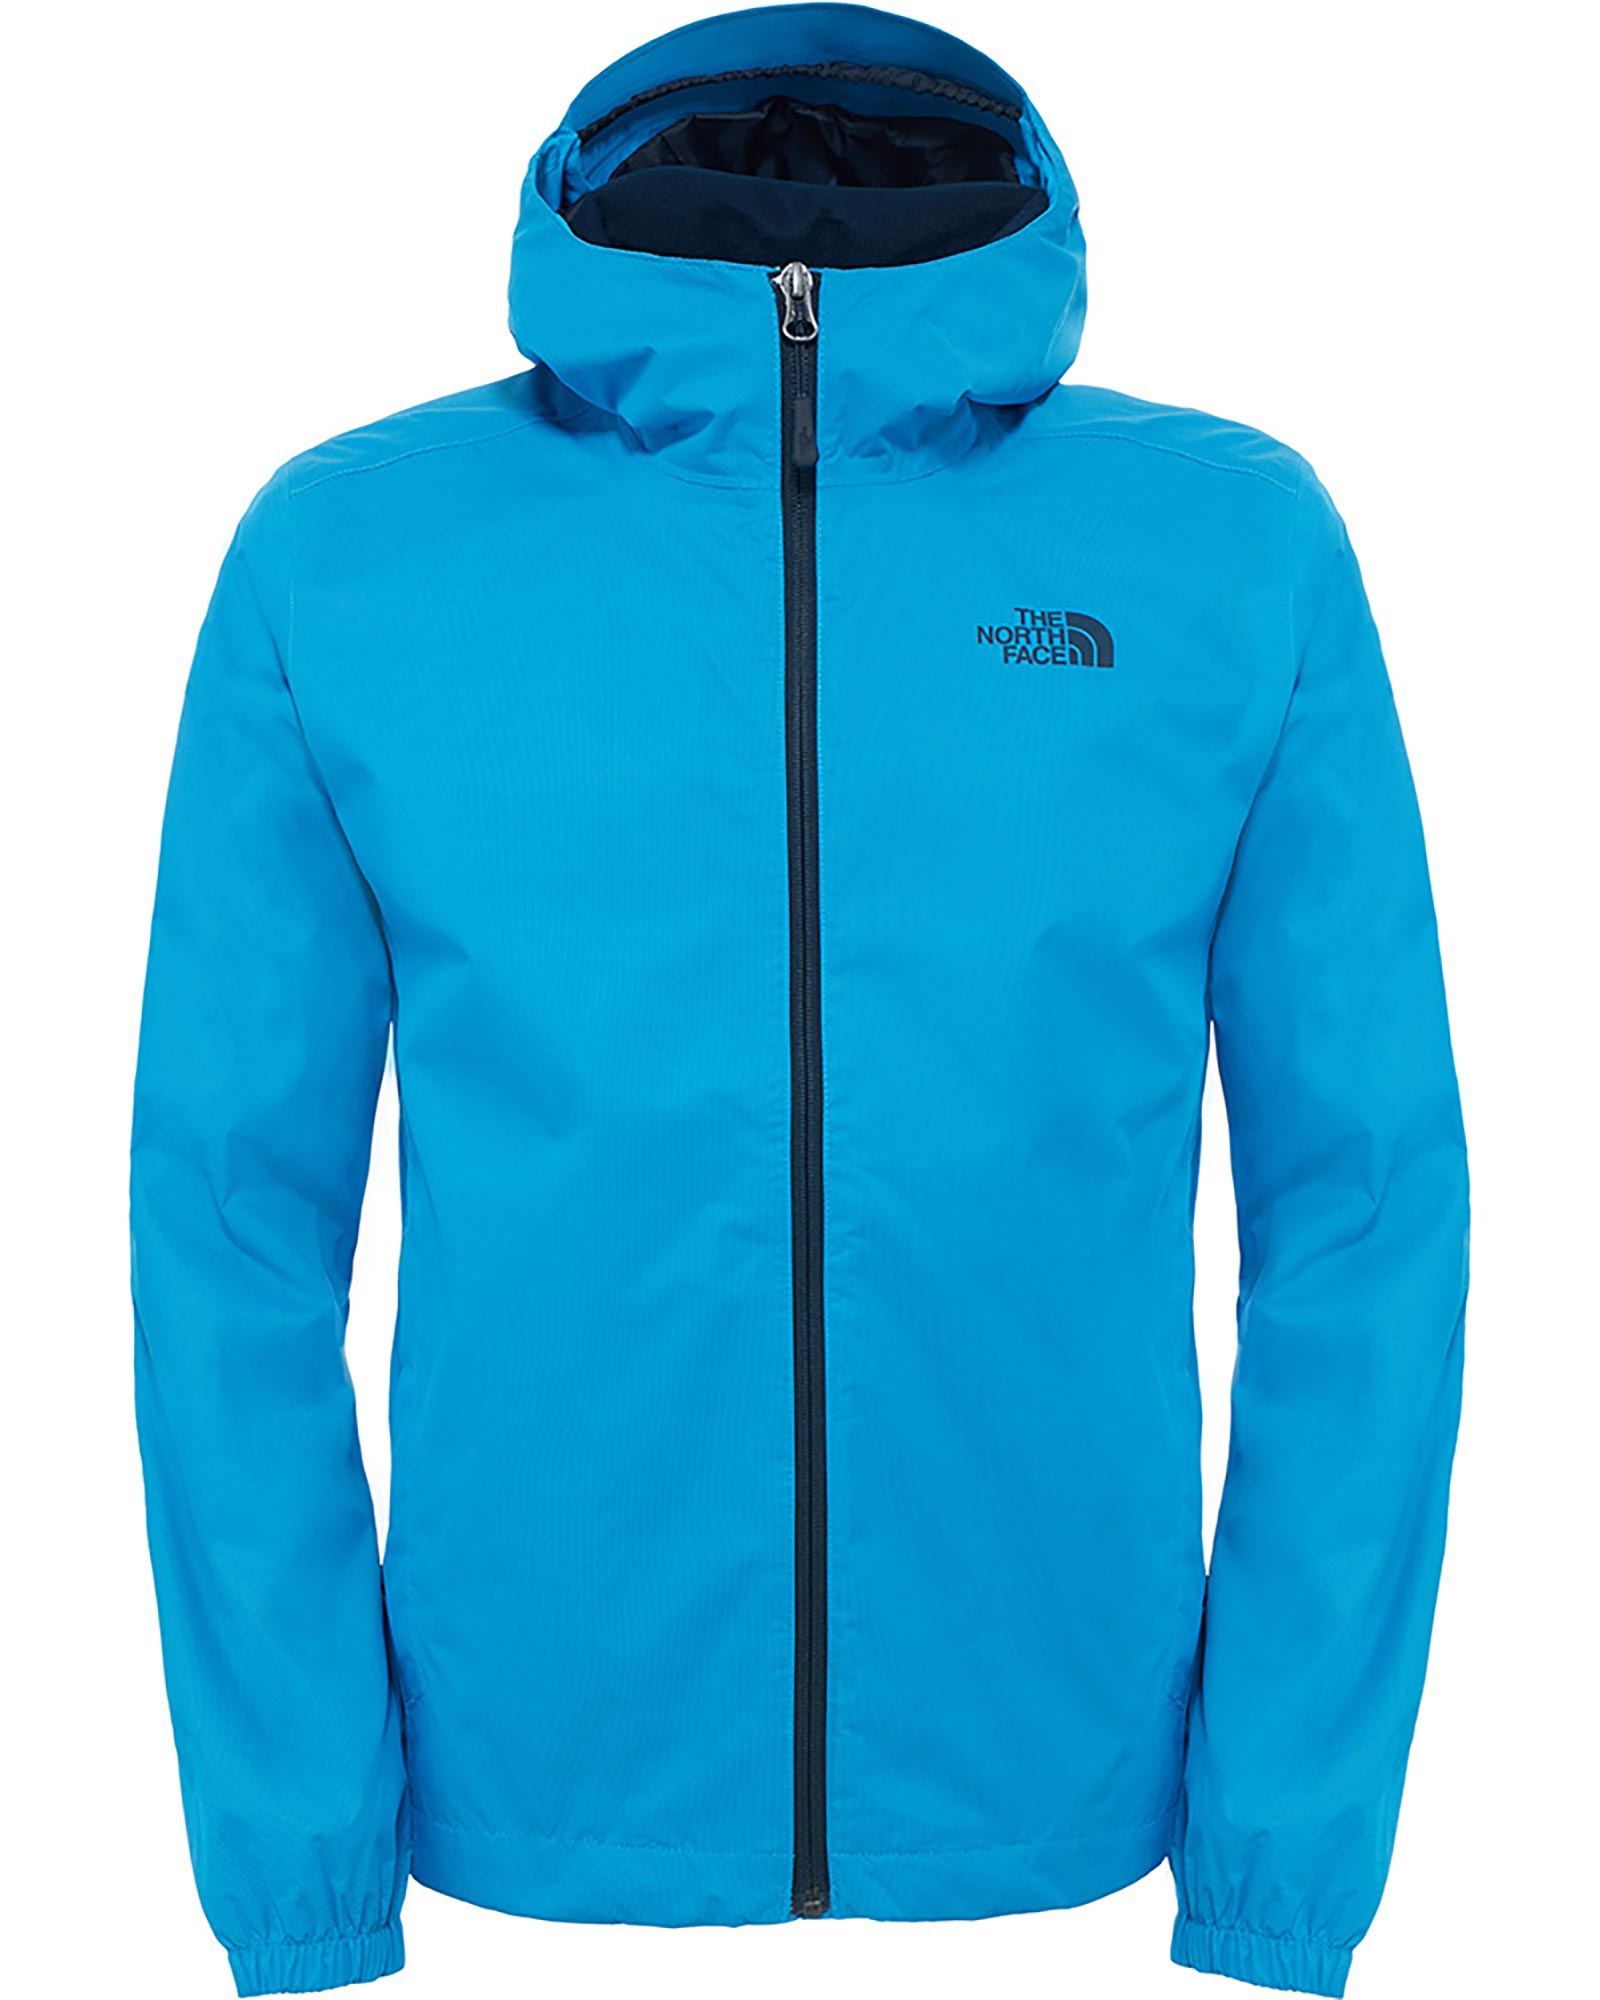 The North Face Quest DryVent Men’s Jacket - Optic Blue Black Heather S